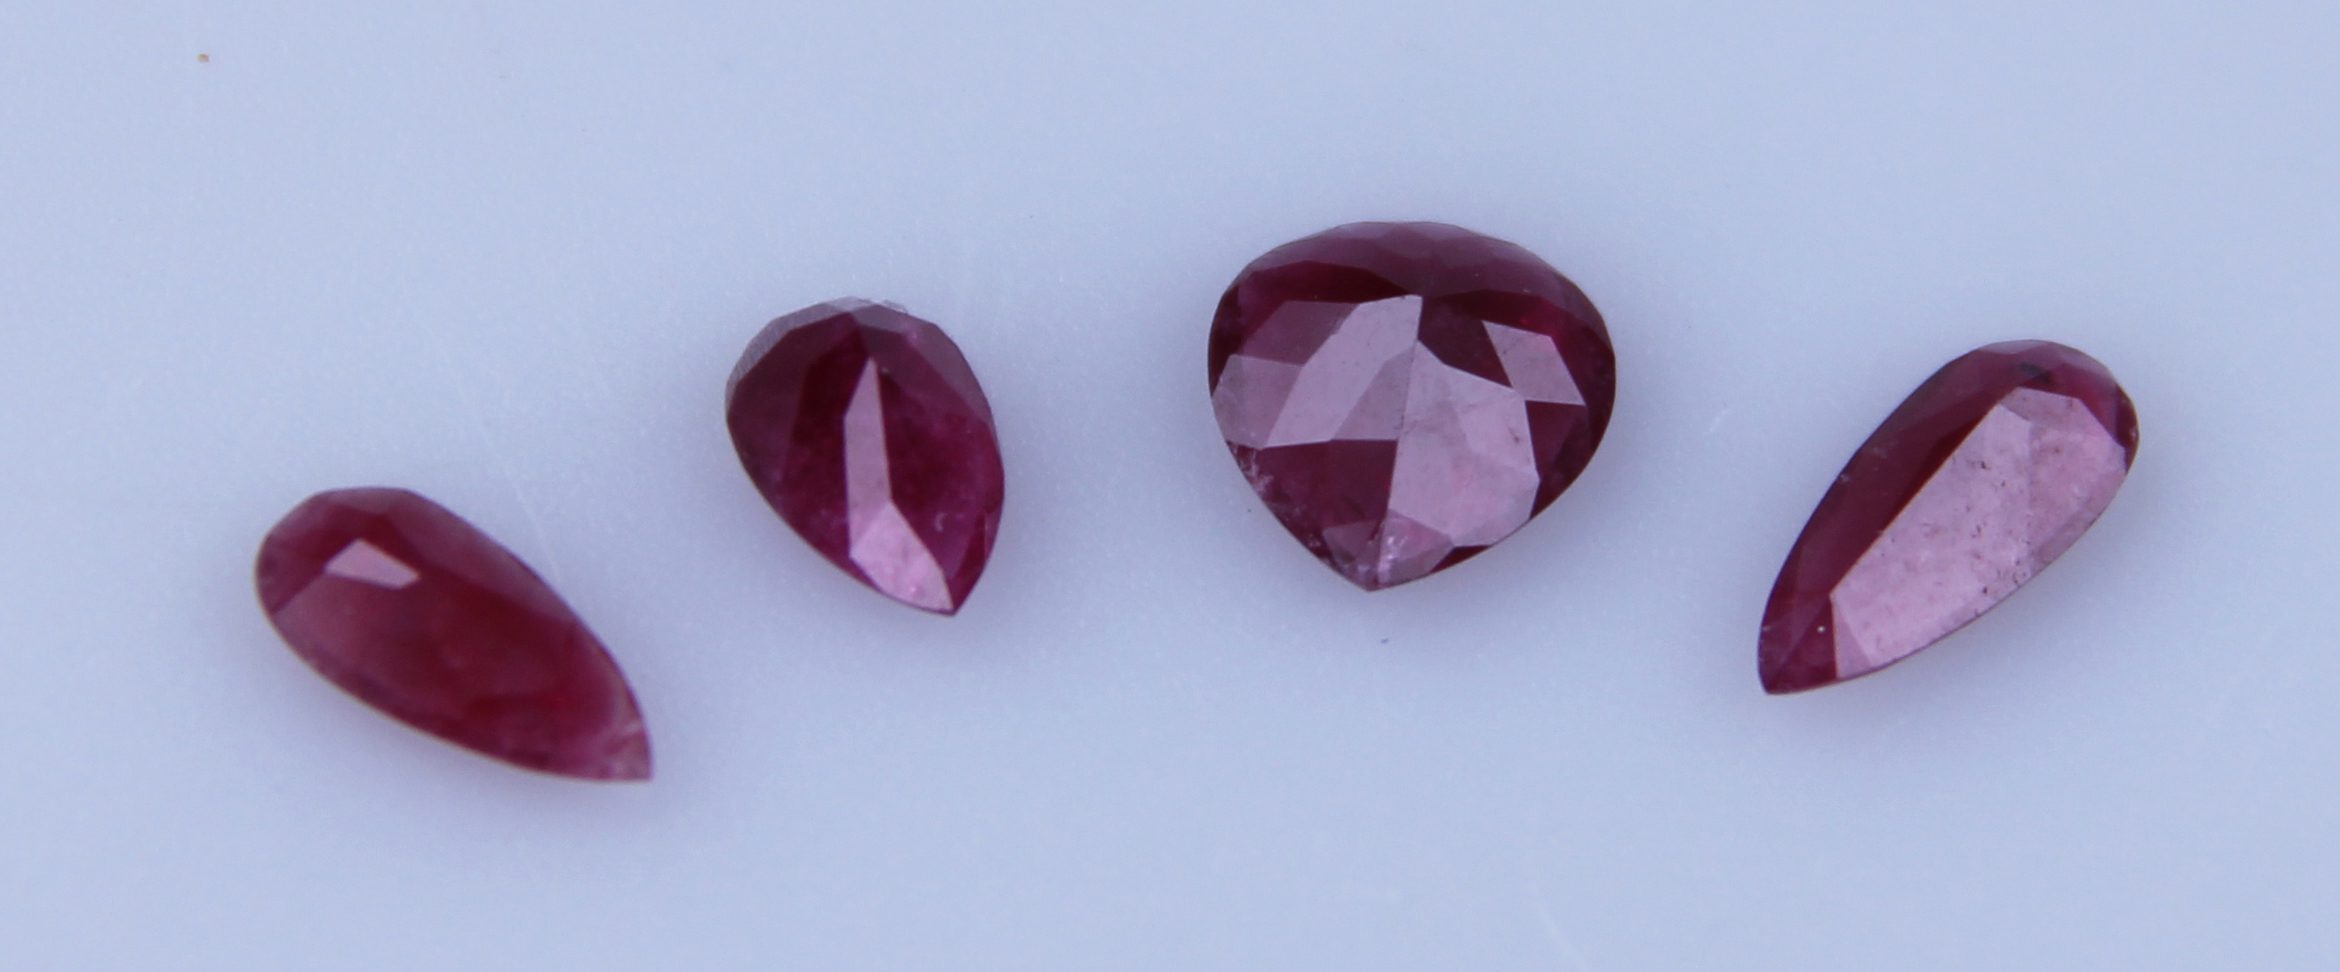 Gemstone Discoveries: What Is the Likeliness of Finding a ‘New’ Gemstone? - - A group of red beryl pear shaped gemstones